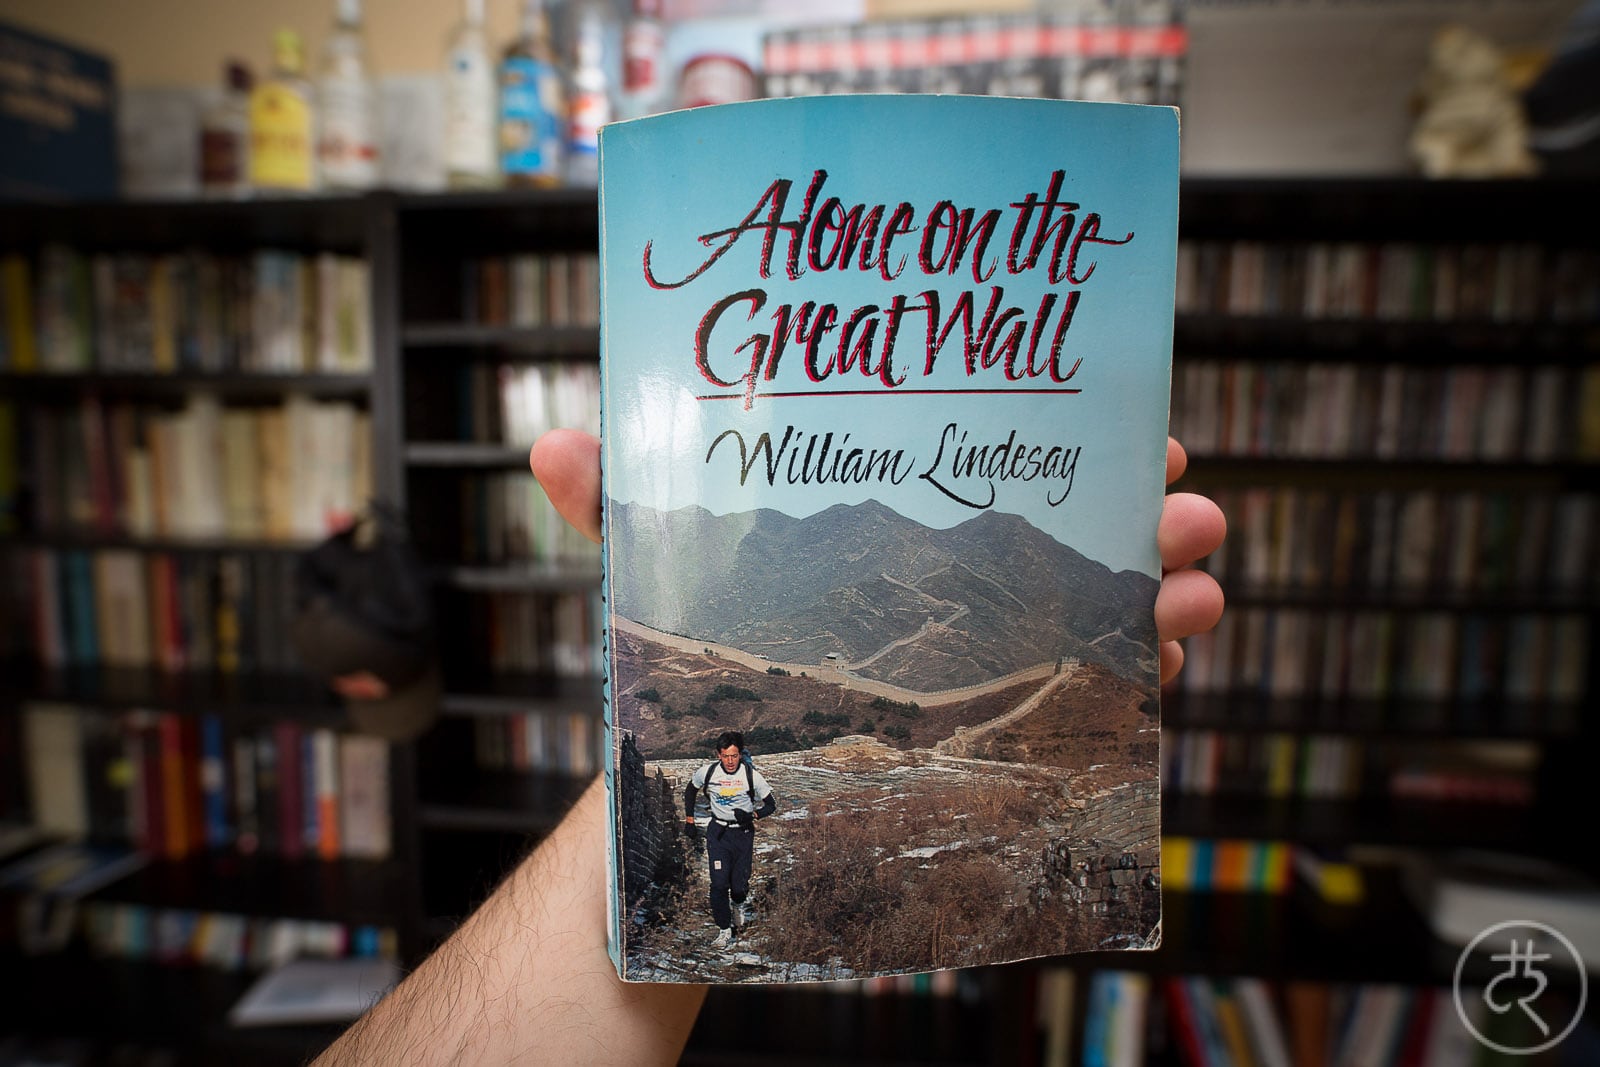 William Lindesay's "Alone on the Great Wall"